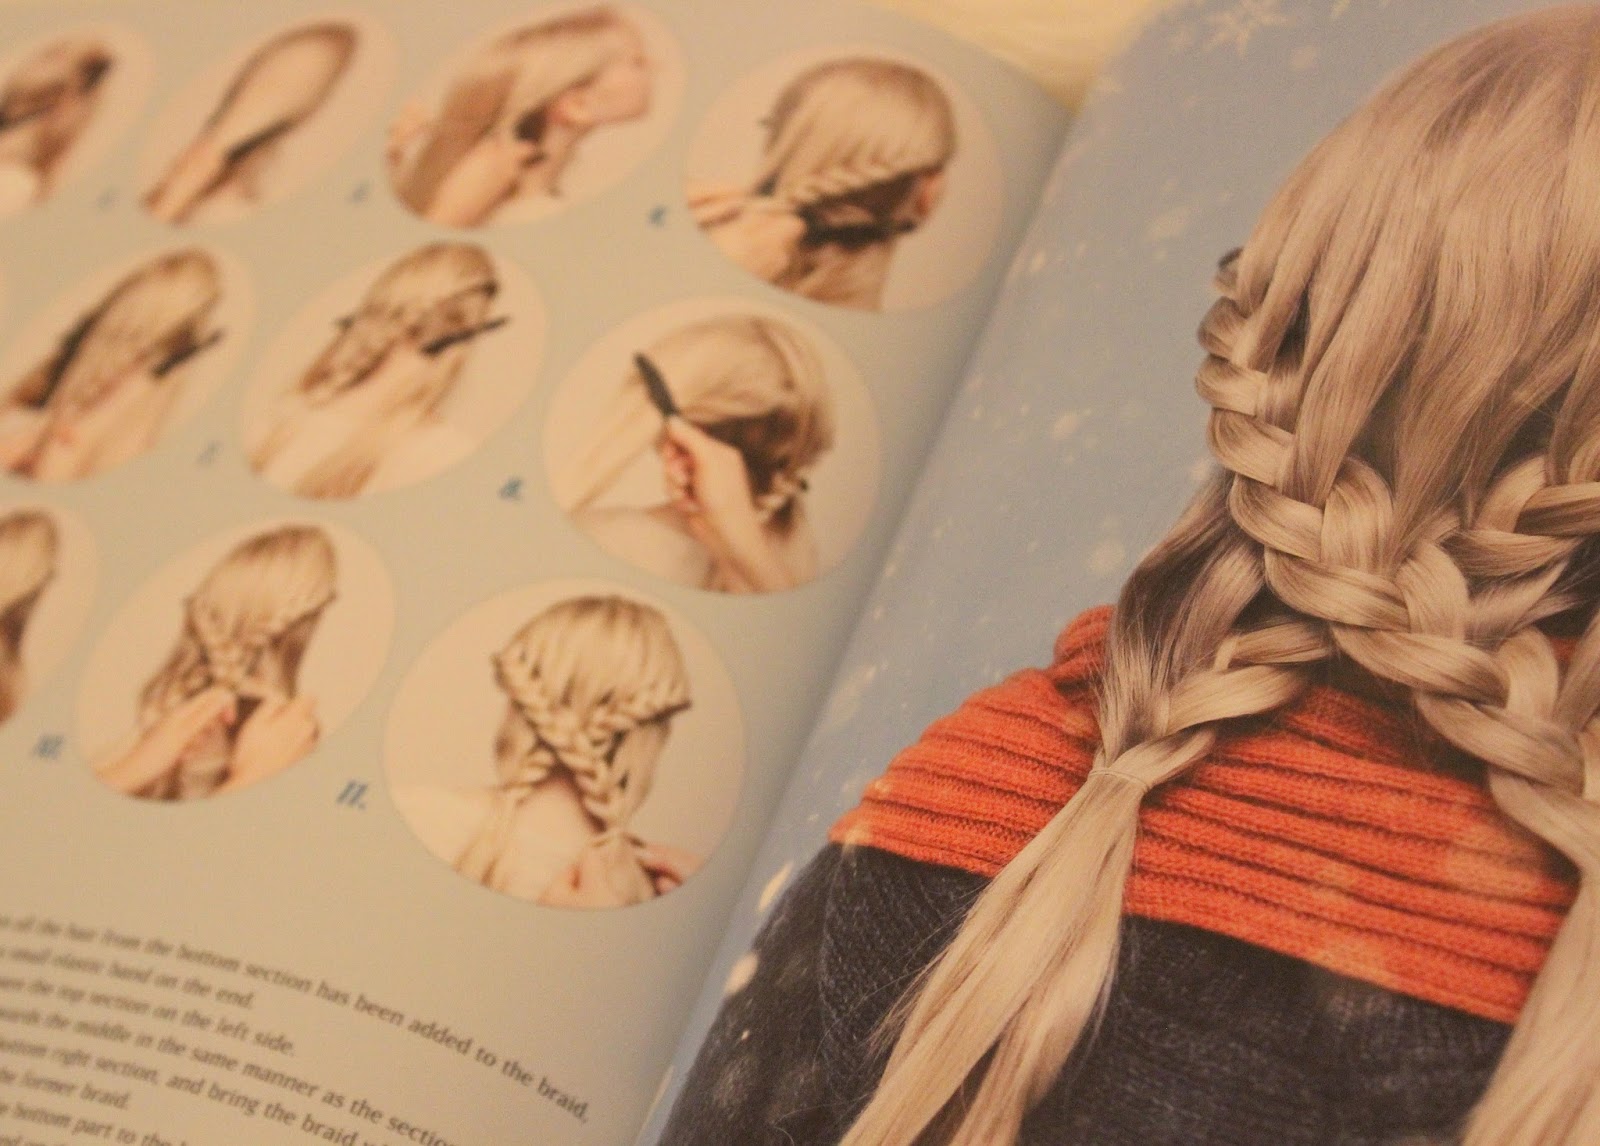 BOOK REVIEW: DISNEY STEP-BY-STEP HAIRSTYLES WITH IMAGES